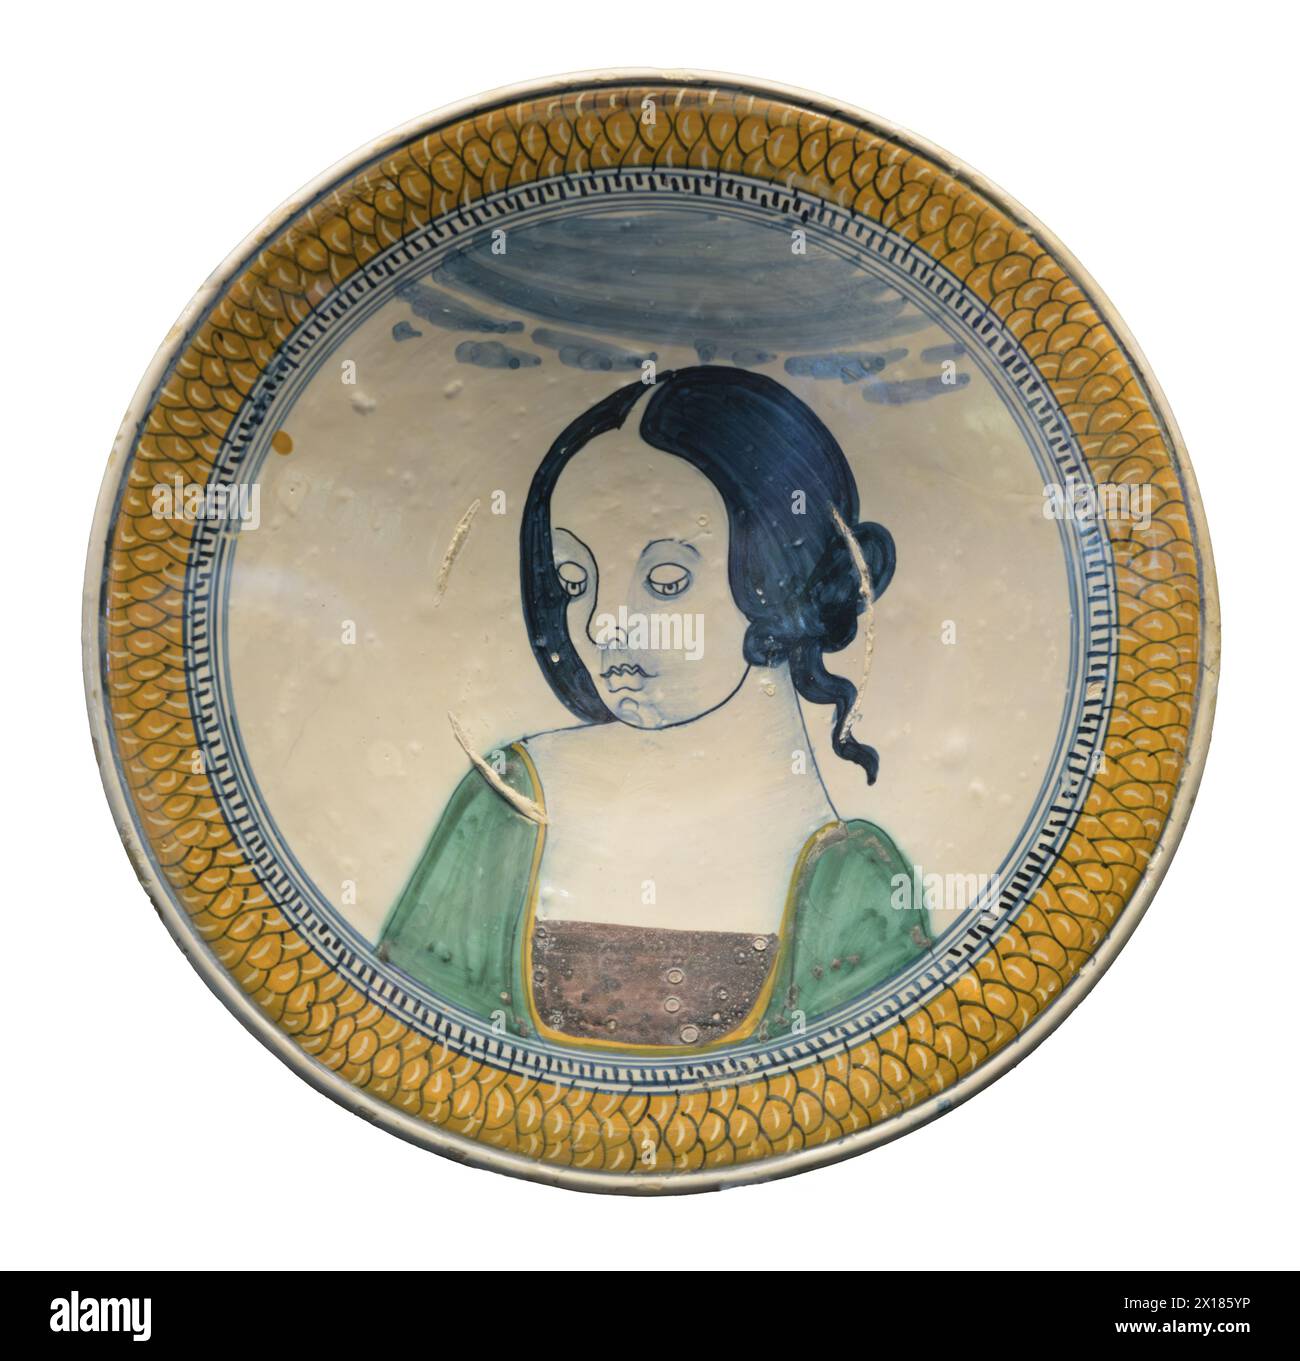 Plate with a woman's portrait, majolica. Faenza, Italy Stock Photo